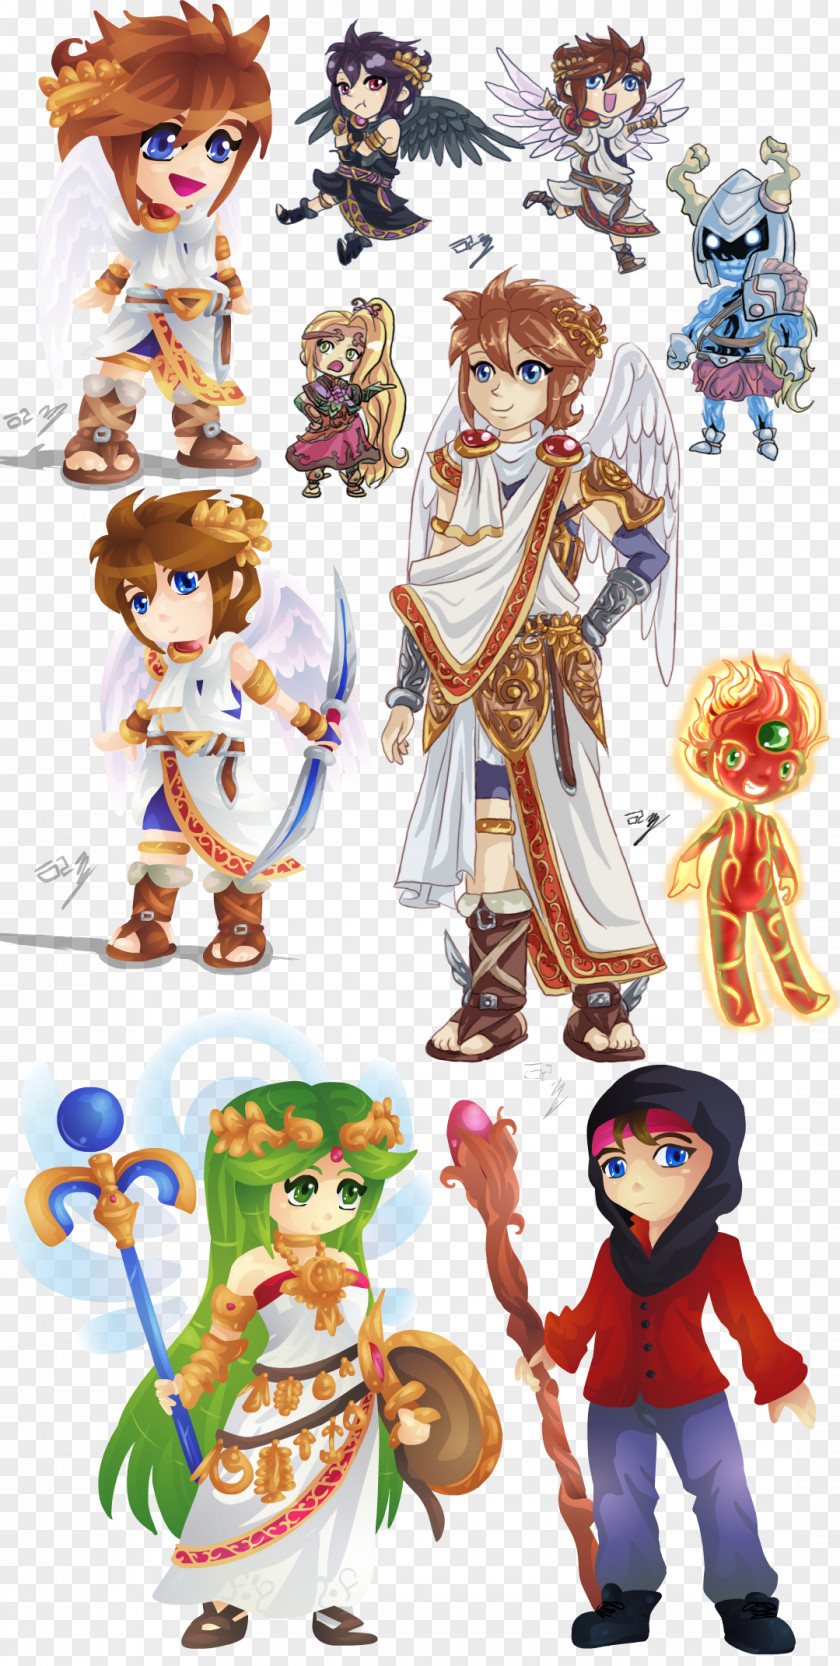 Kid Icarus: Uprising Super Smash Bros. For Nintendo 3DS And Wii U Pit Palutena PNG